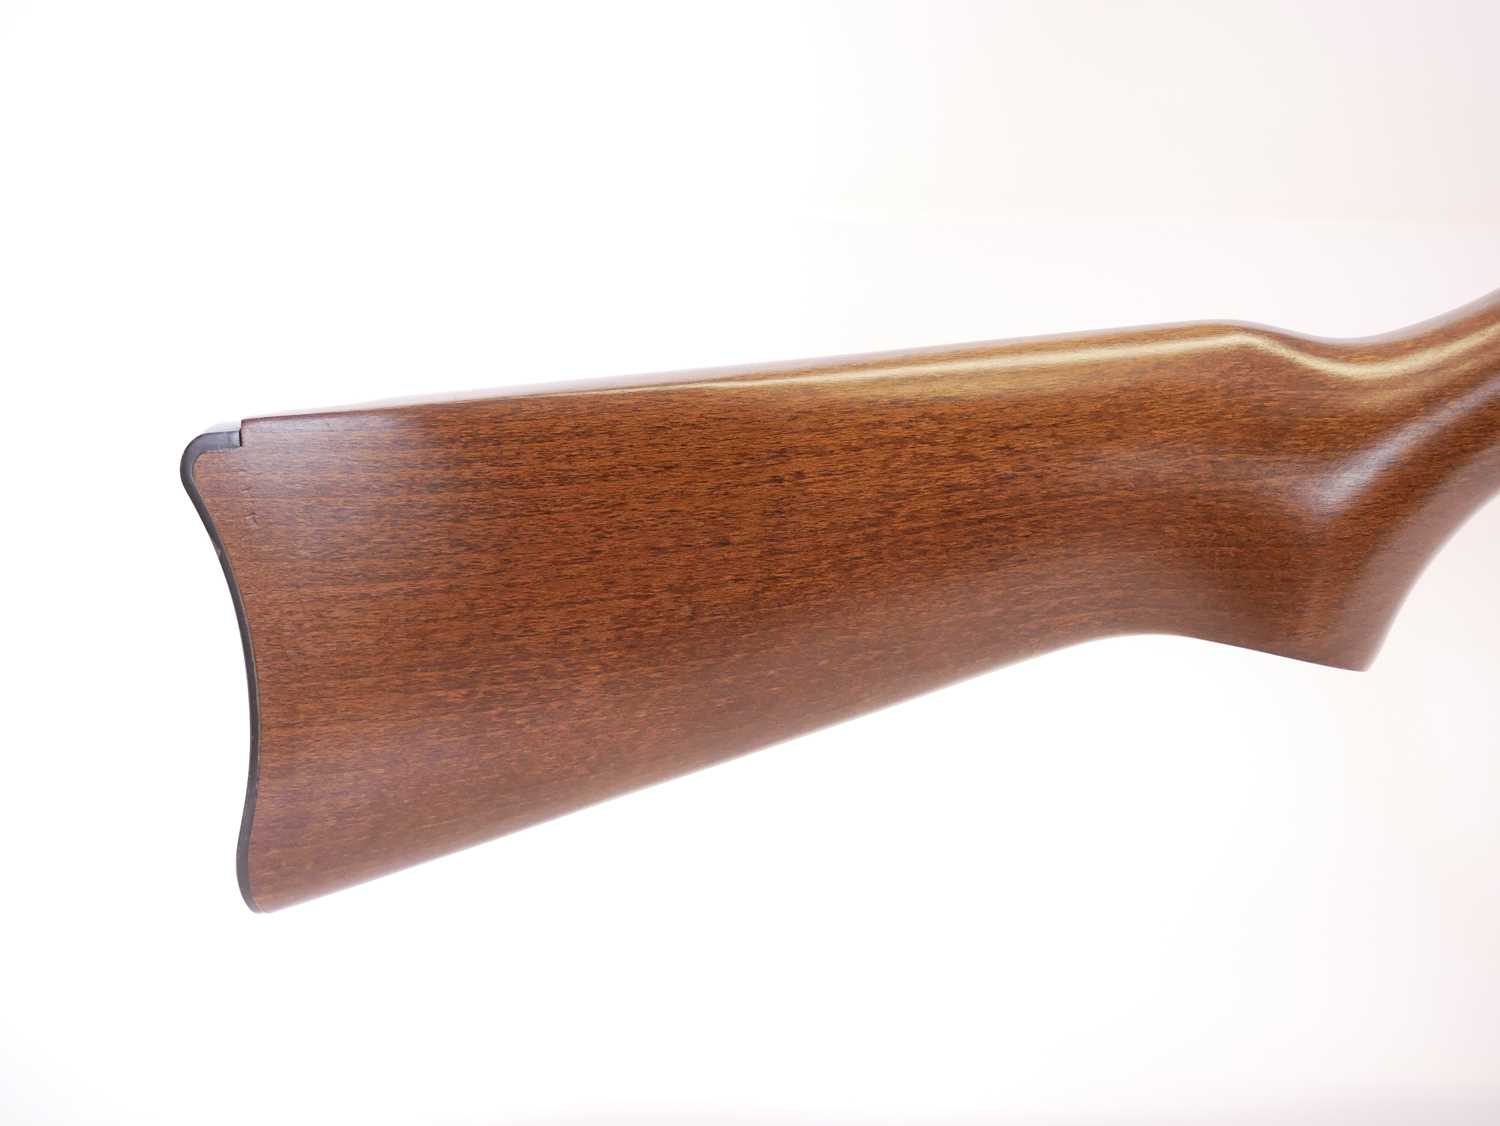 Ruger 10-22 .22lr semi auto rifle and moderator, serial number 356-73813, 16.5inch barrel fitted - Image 3 of 11